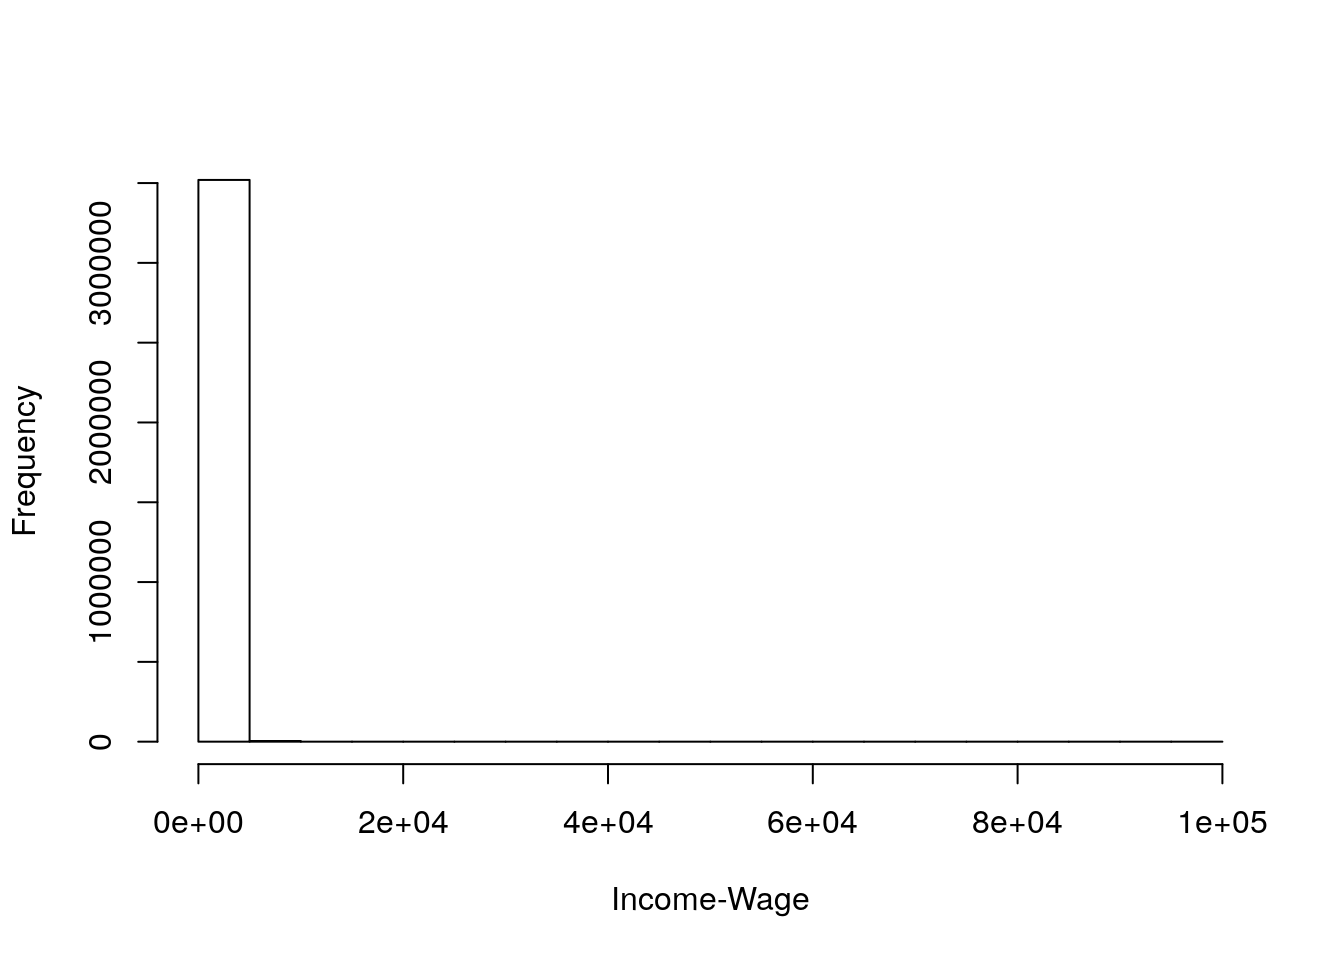 Histogram of Income-Wage